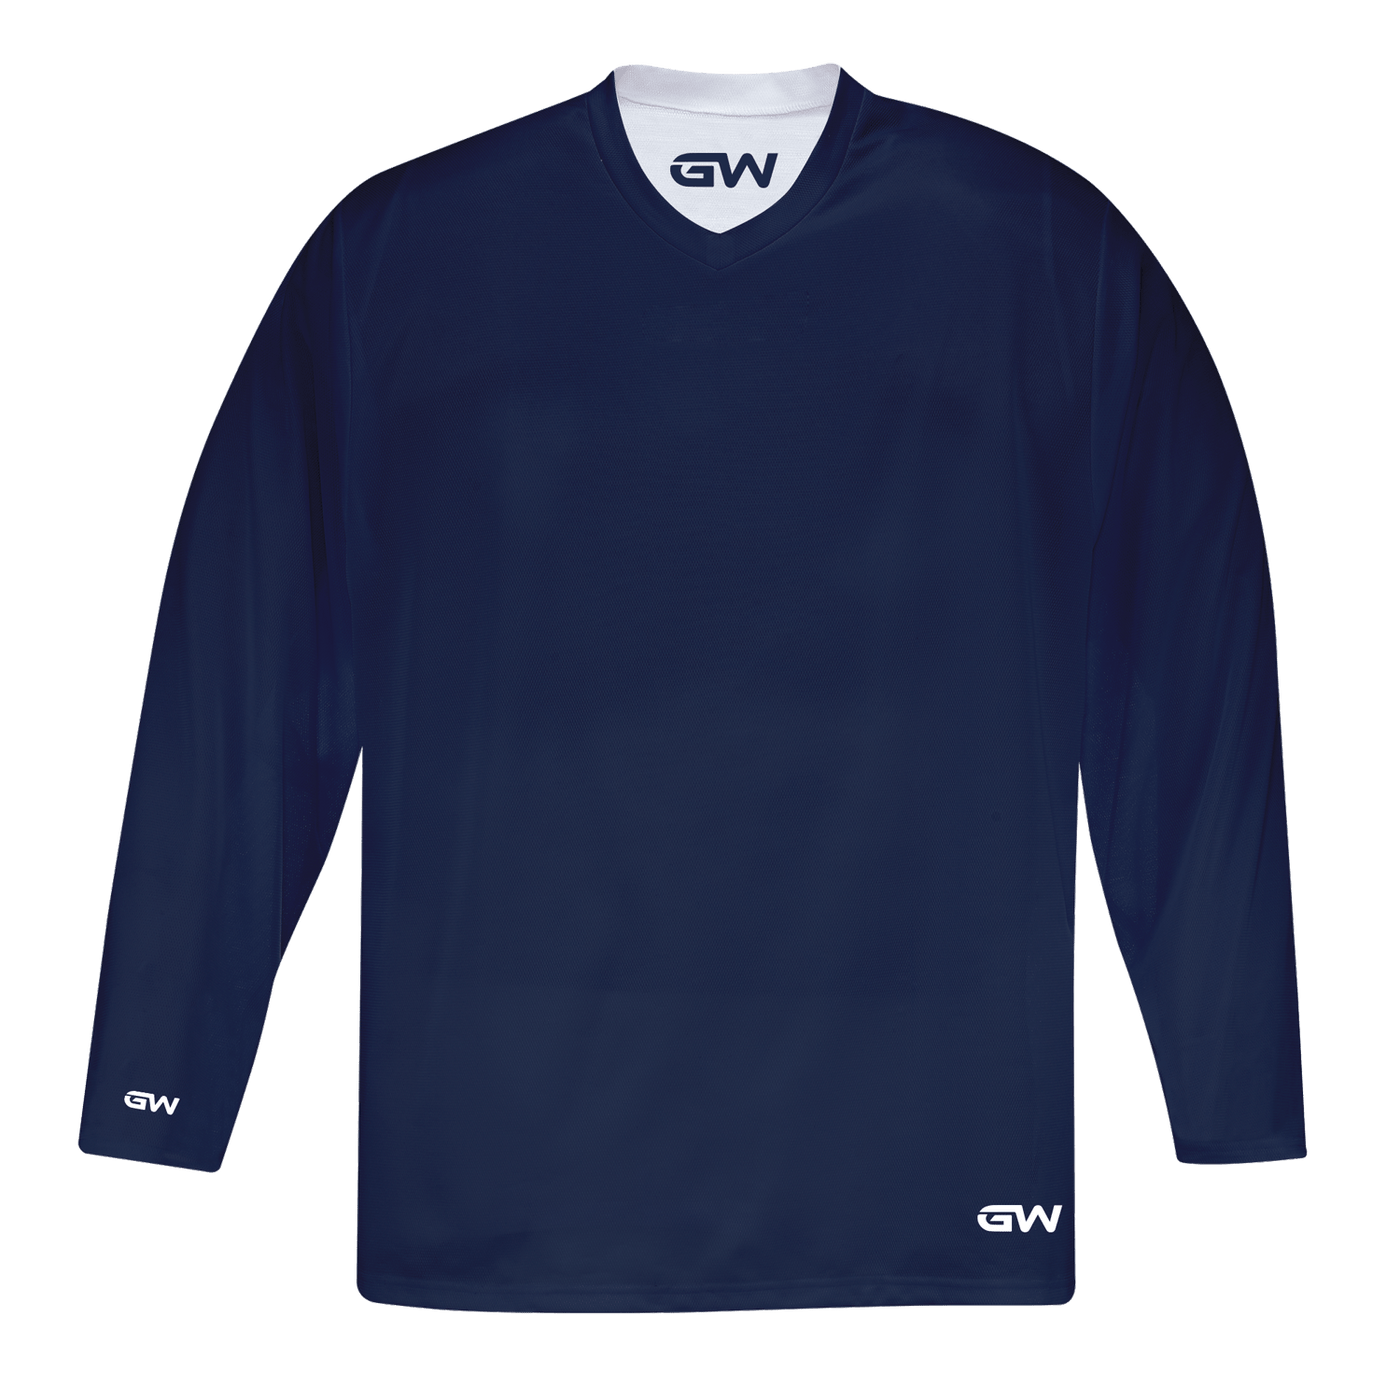 GameWear GW7500 ProLite Series Reversible Junior Hockey Practice Jersey - Navy / White - The Hockey Shop Source For Sports